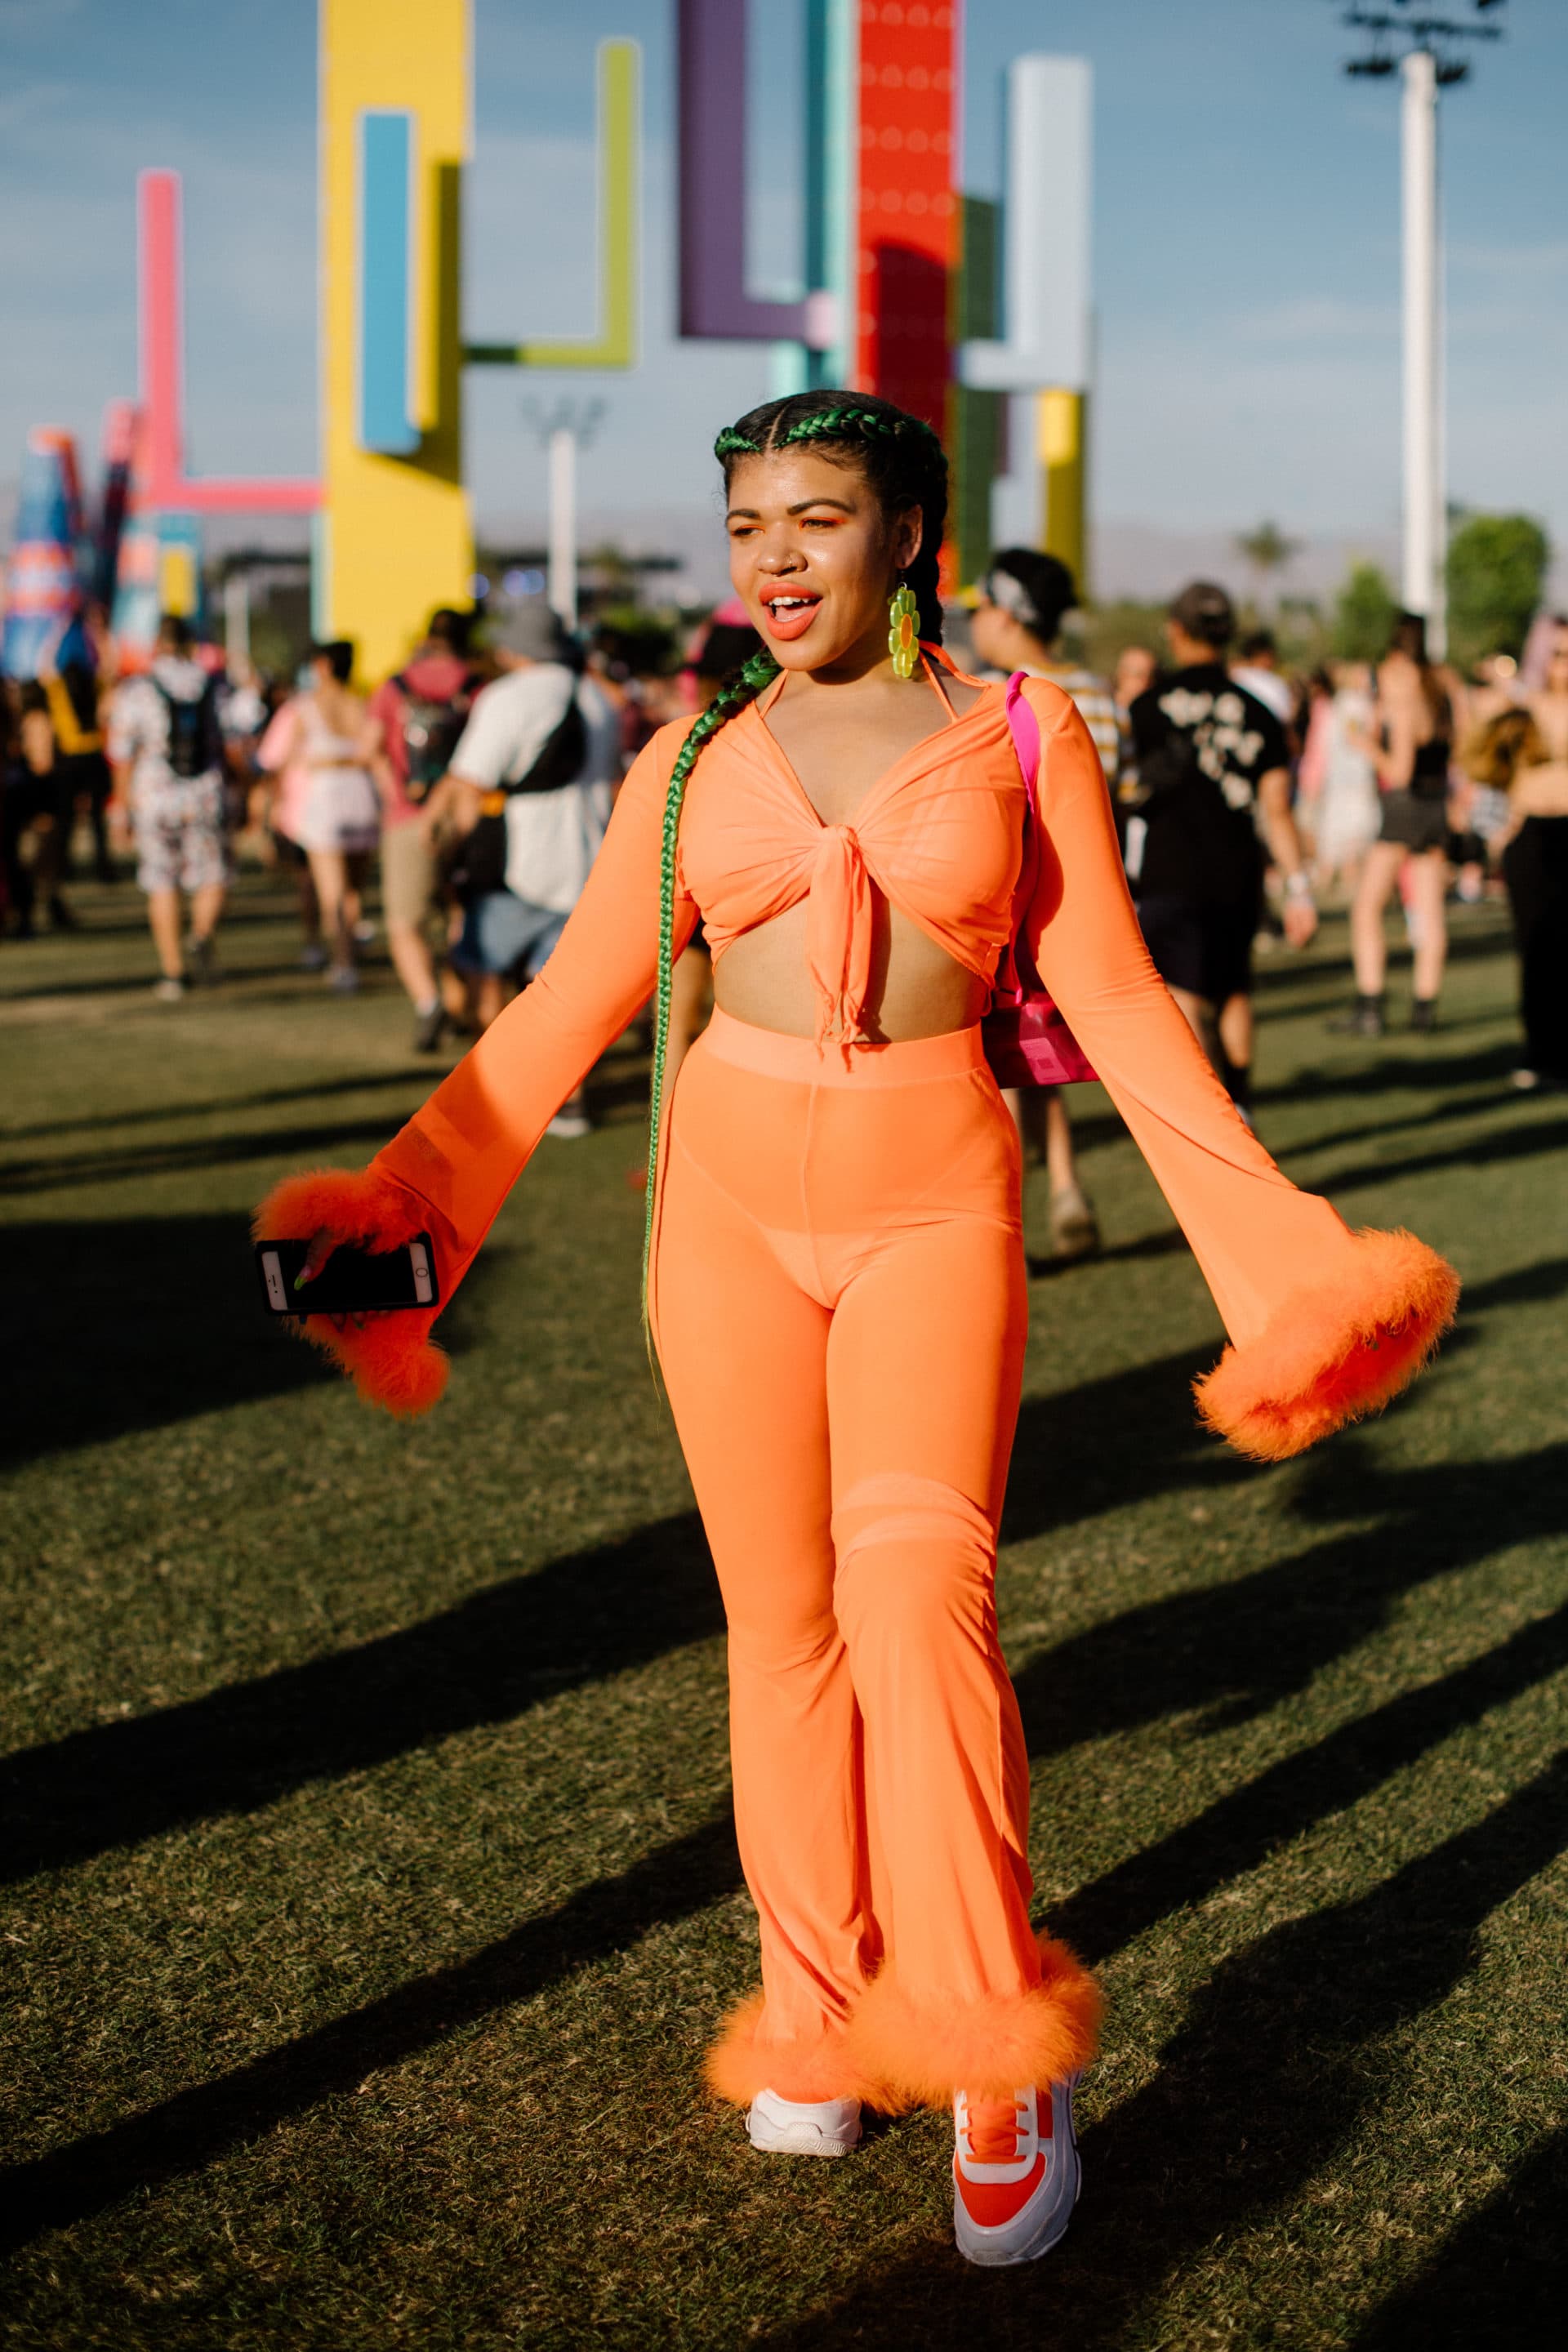 The Best 'Black Girl Magic' Style Moments at Coachella 2019